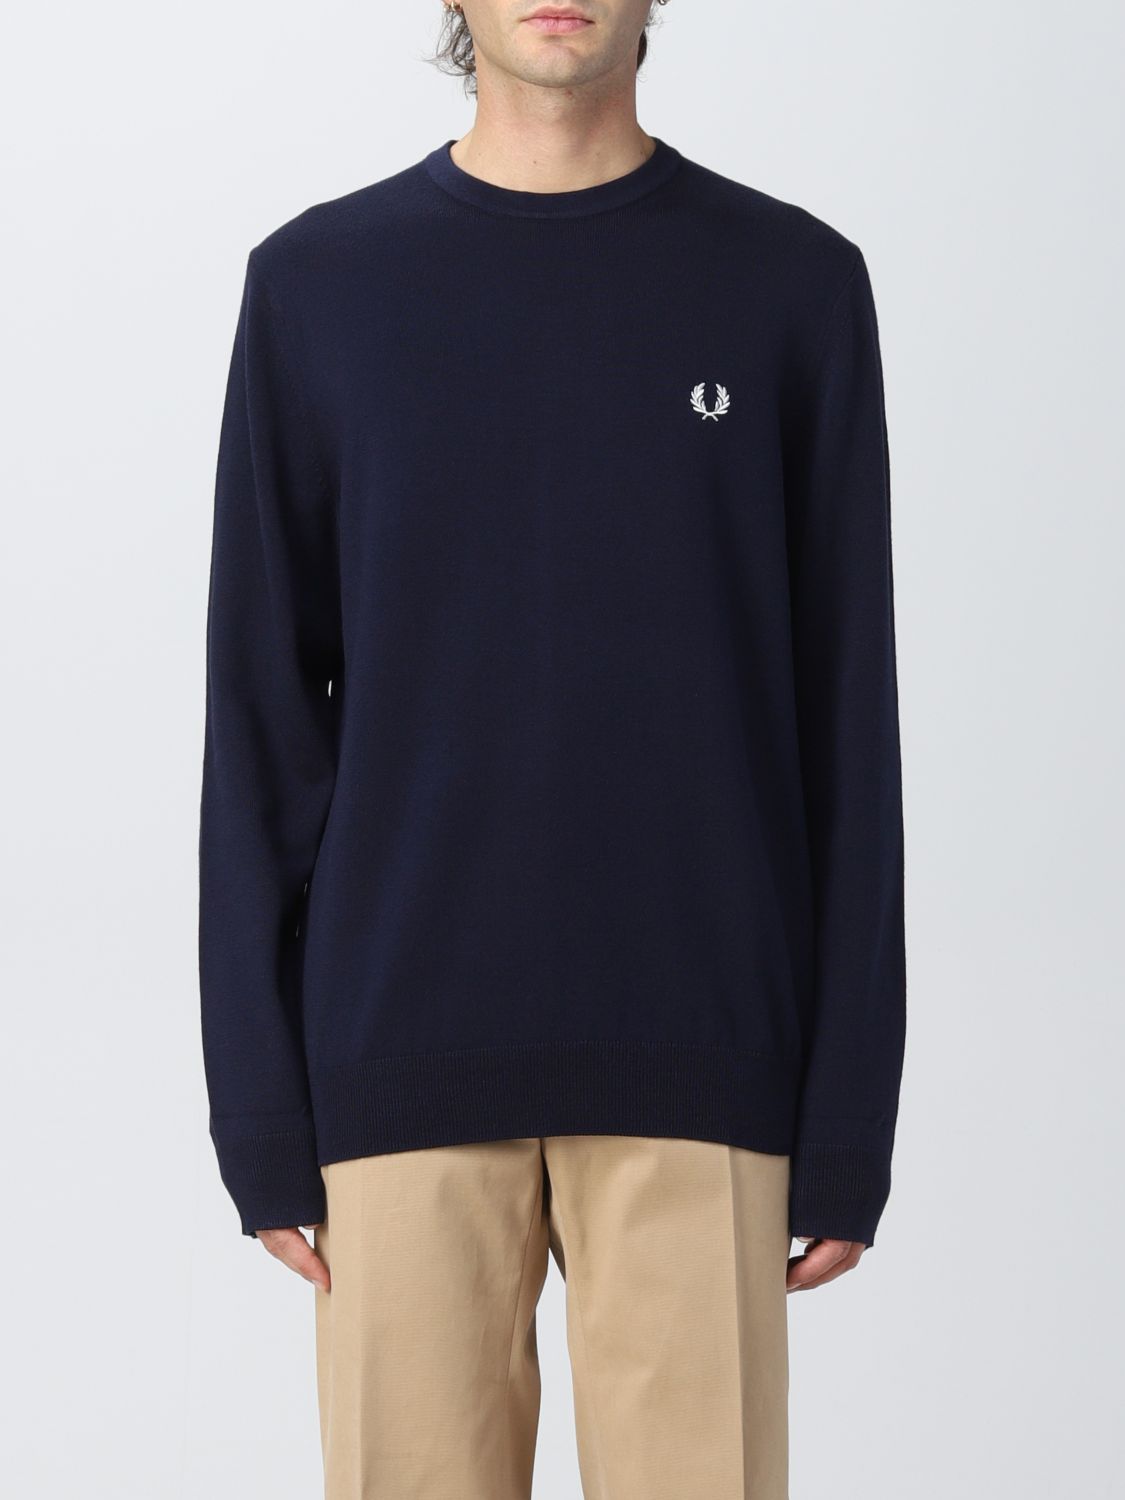 Pullover Fred Perry: Fred Perry Herren Pullover navy 1